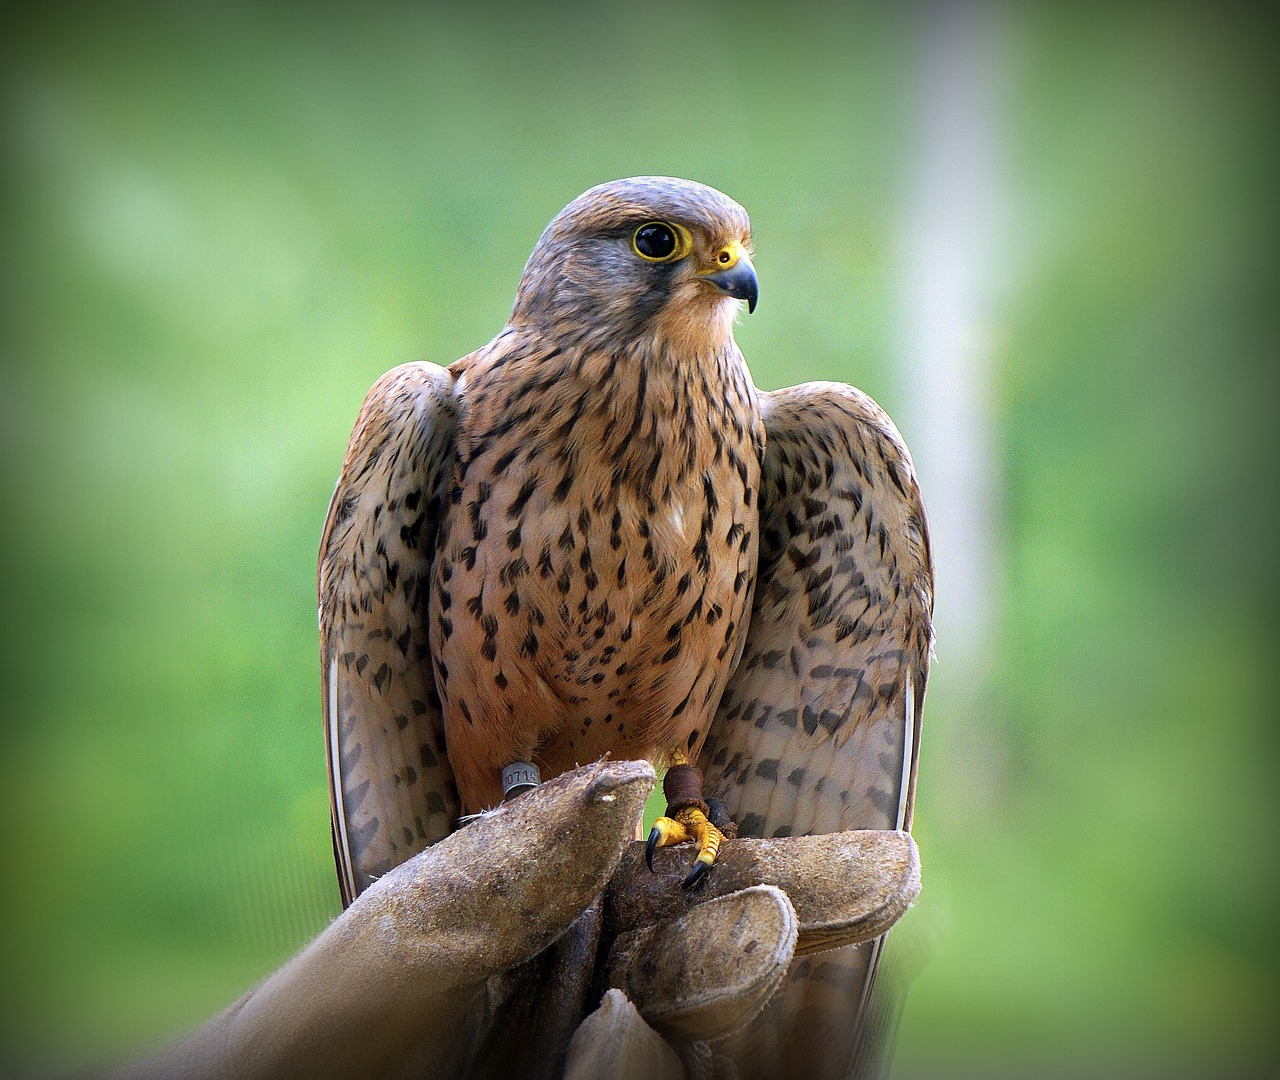 a close up of a bird of prey on a person's hand, a photo, by Juergen von Huendeberg, hdr photo, rubbing hands!!!, grain”